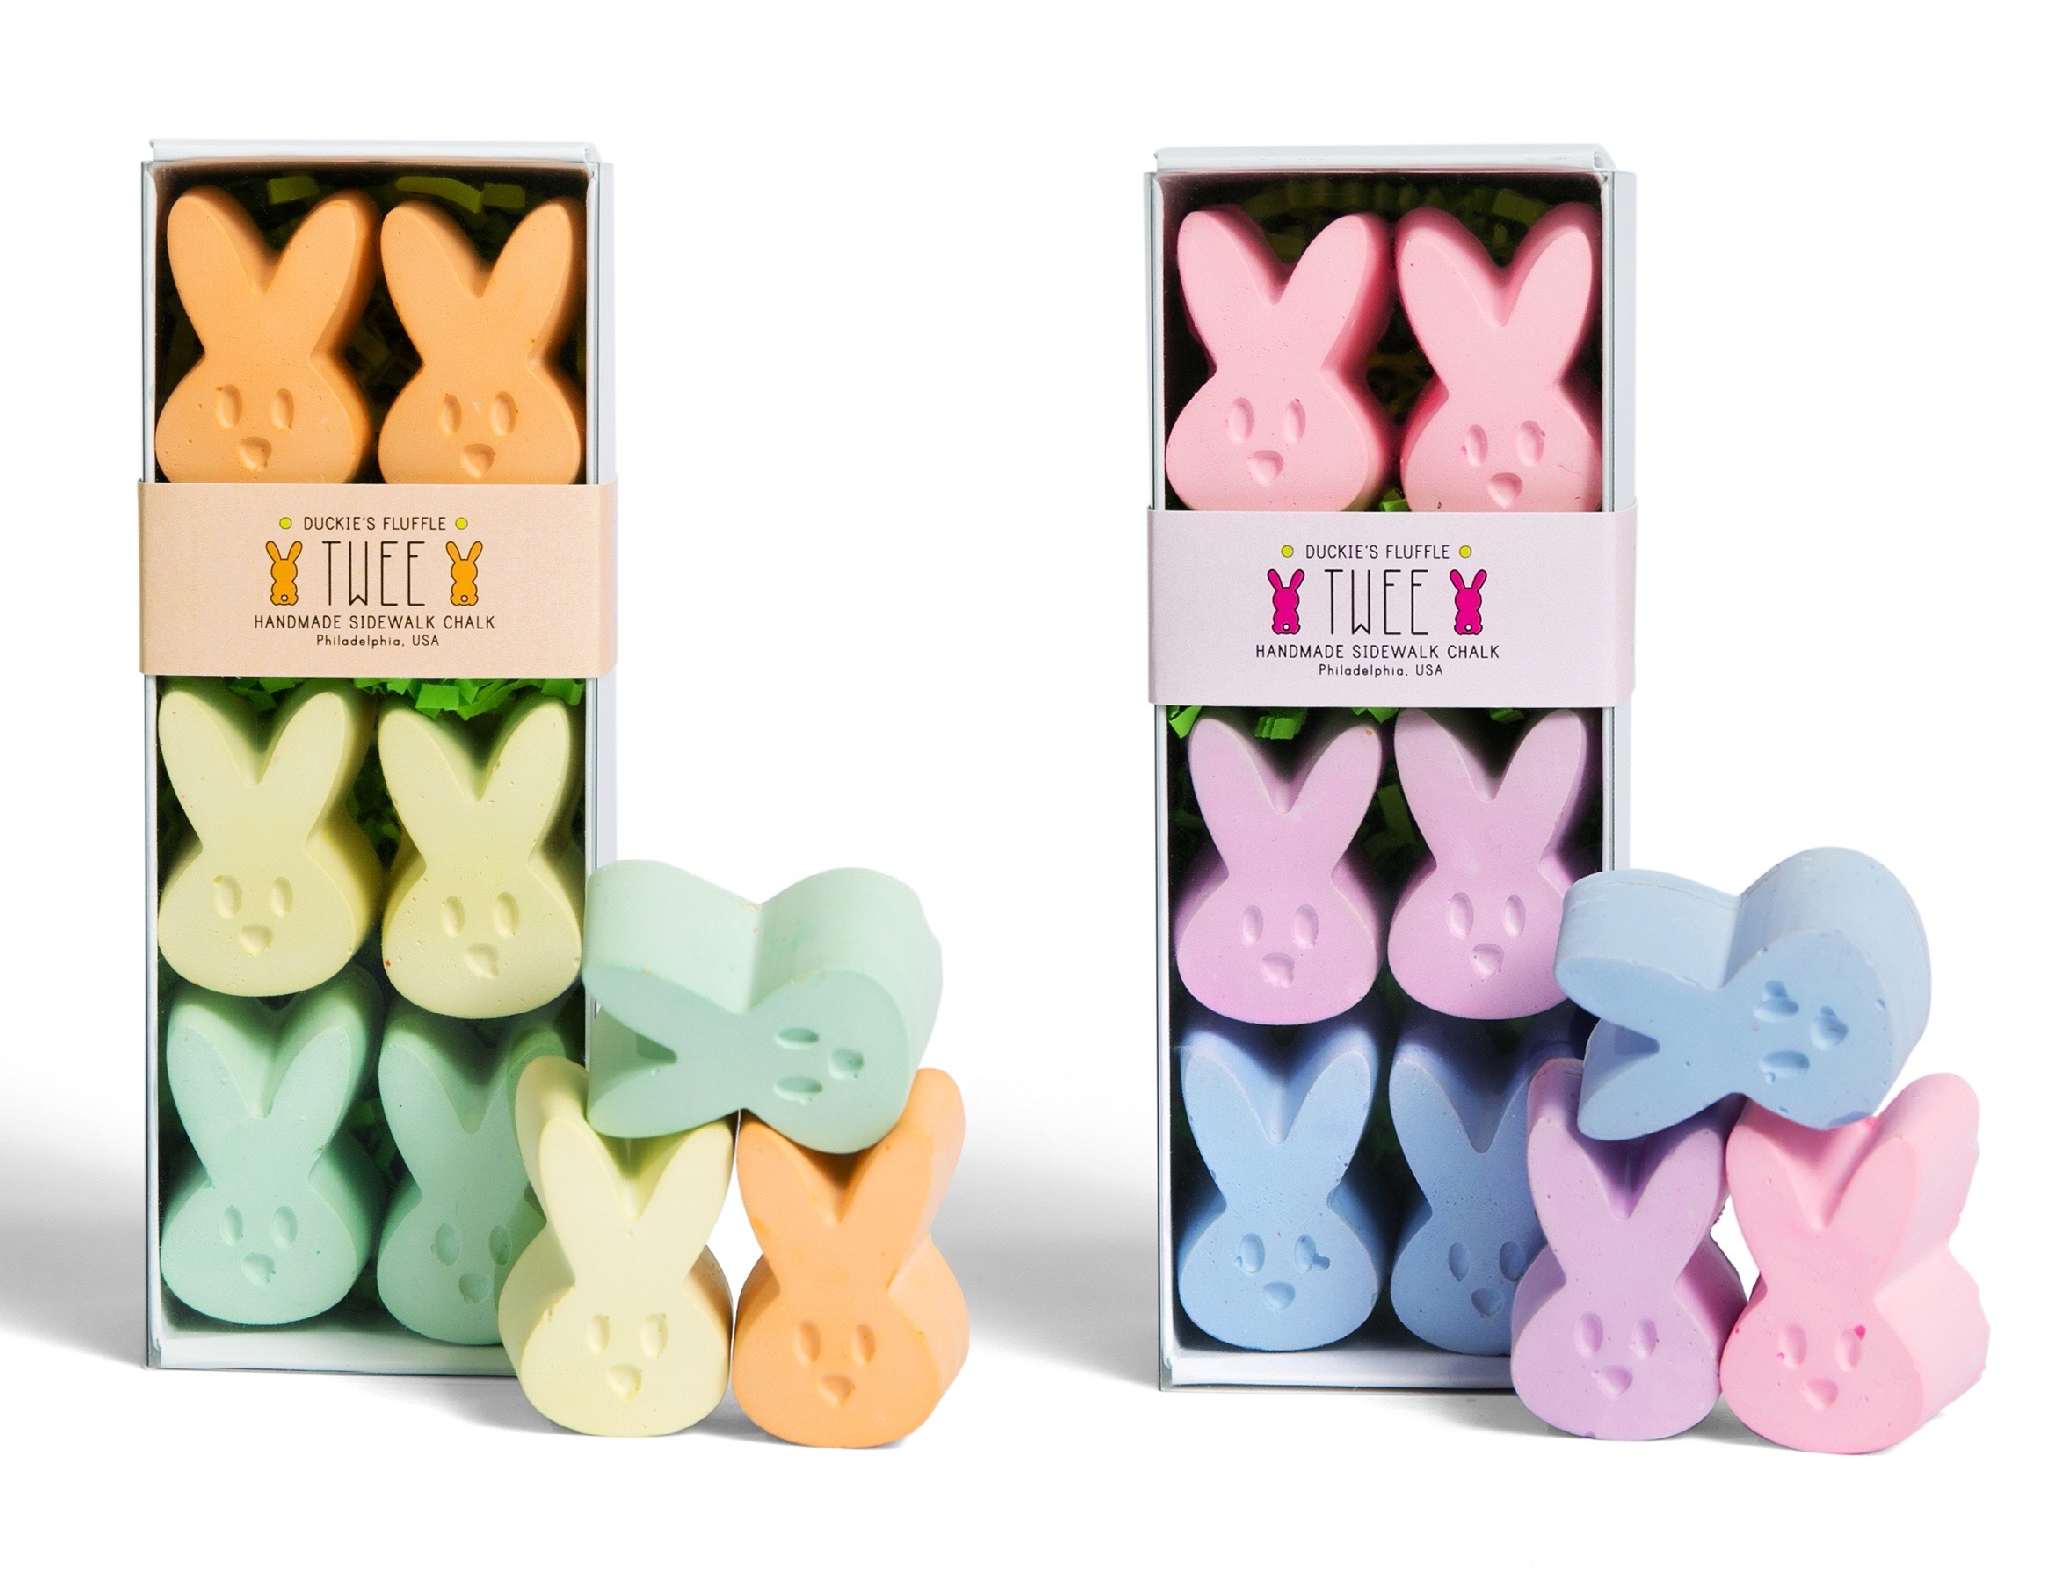 Two boxes of bunny shaped children's chalk. Yellow, orange, green, blue, purple, and pink. White background. TWEE brand.